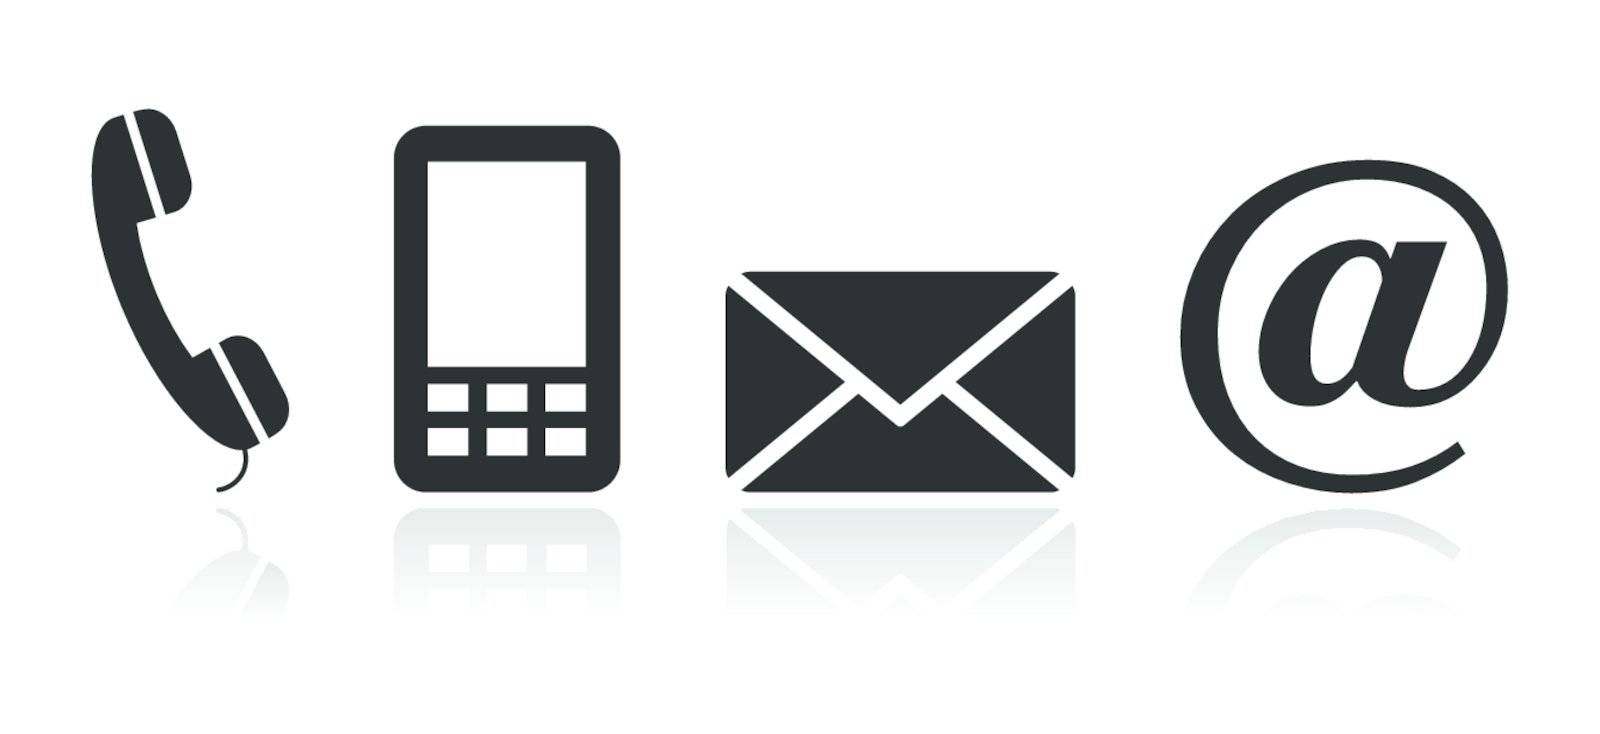 Contact black icons set - mobile, phone, email, envelope by RedKoala